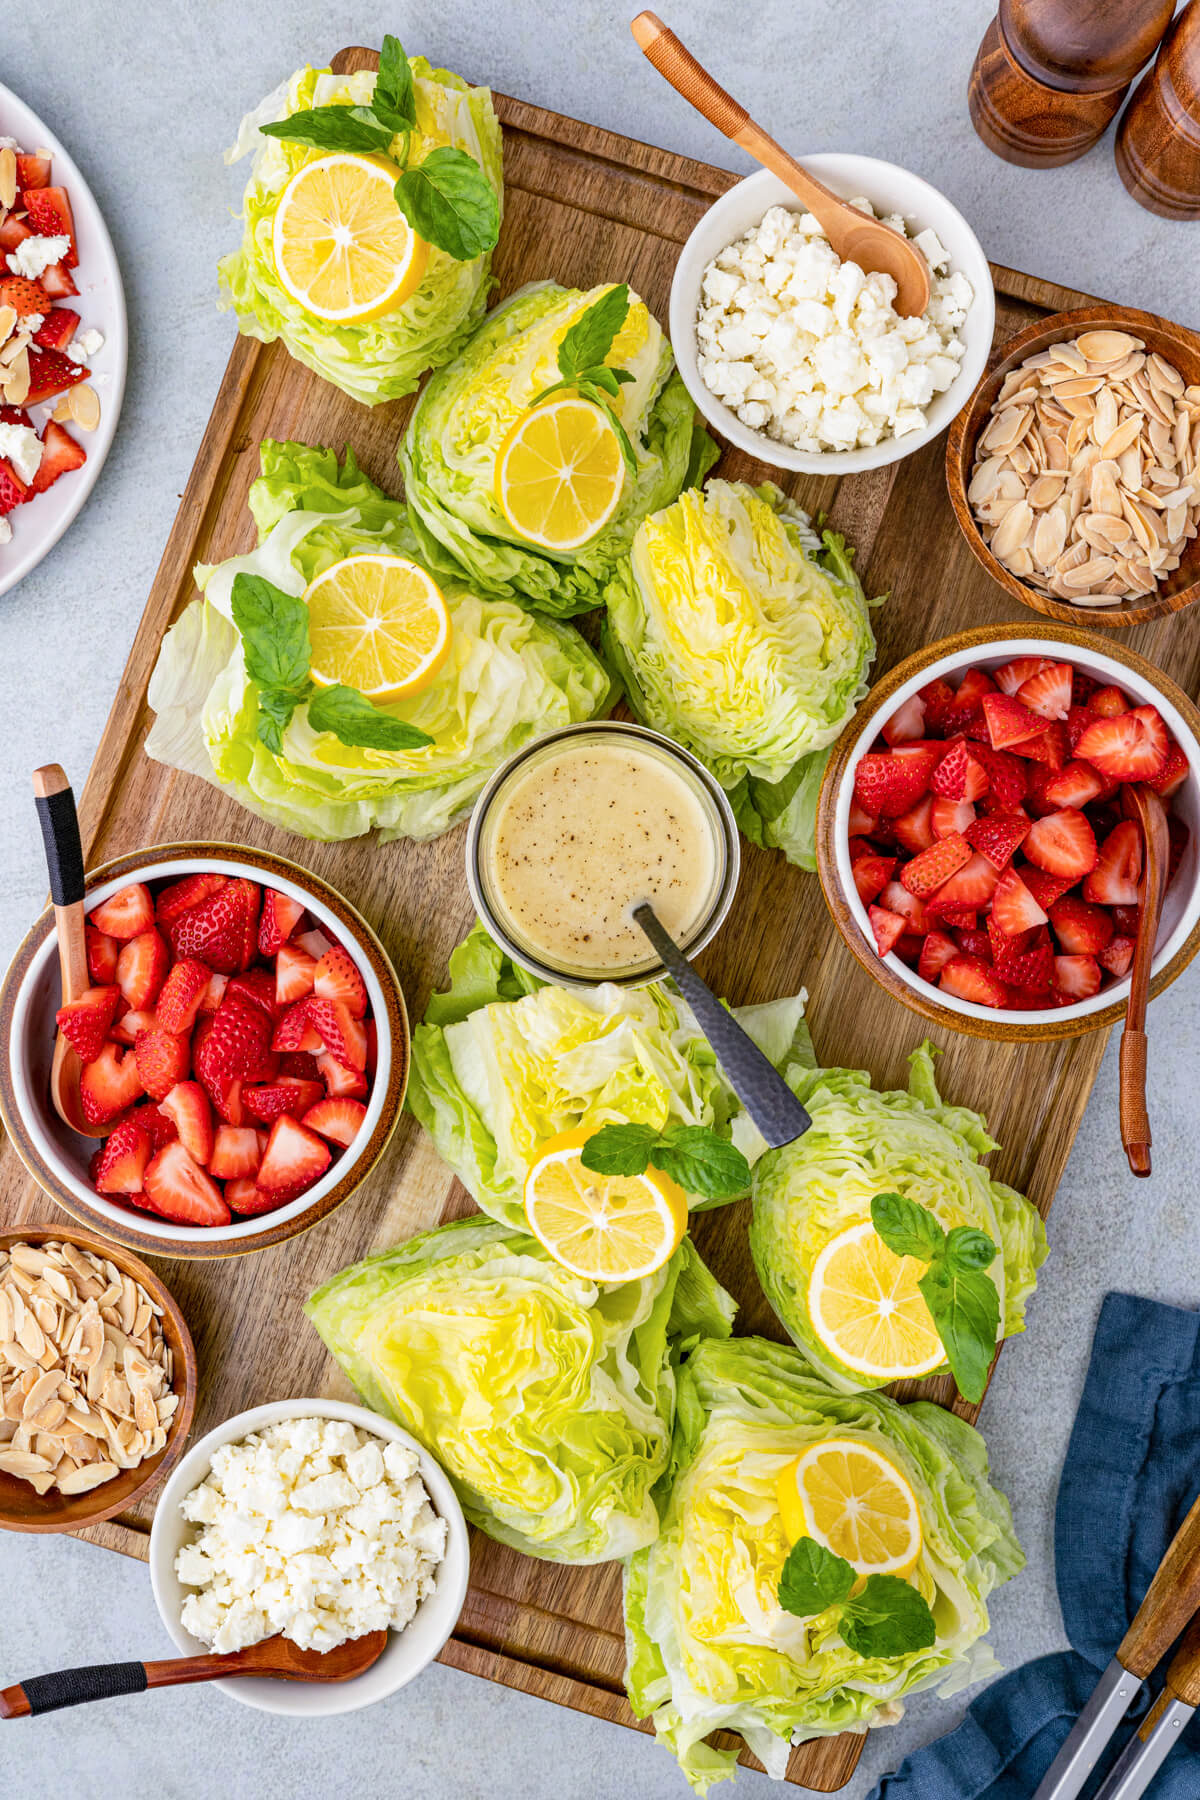 Iceberg lettuce wedges and lemon vinaigrette arranged on a wooden serving board with bowls of strawberries, feta, and almonds.